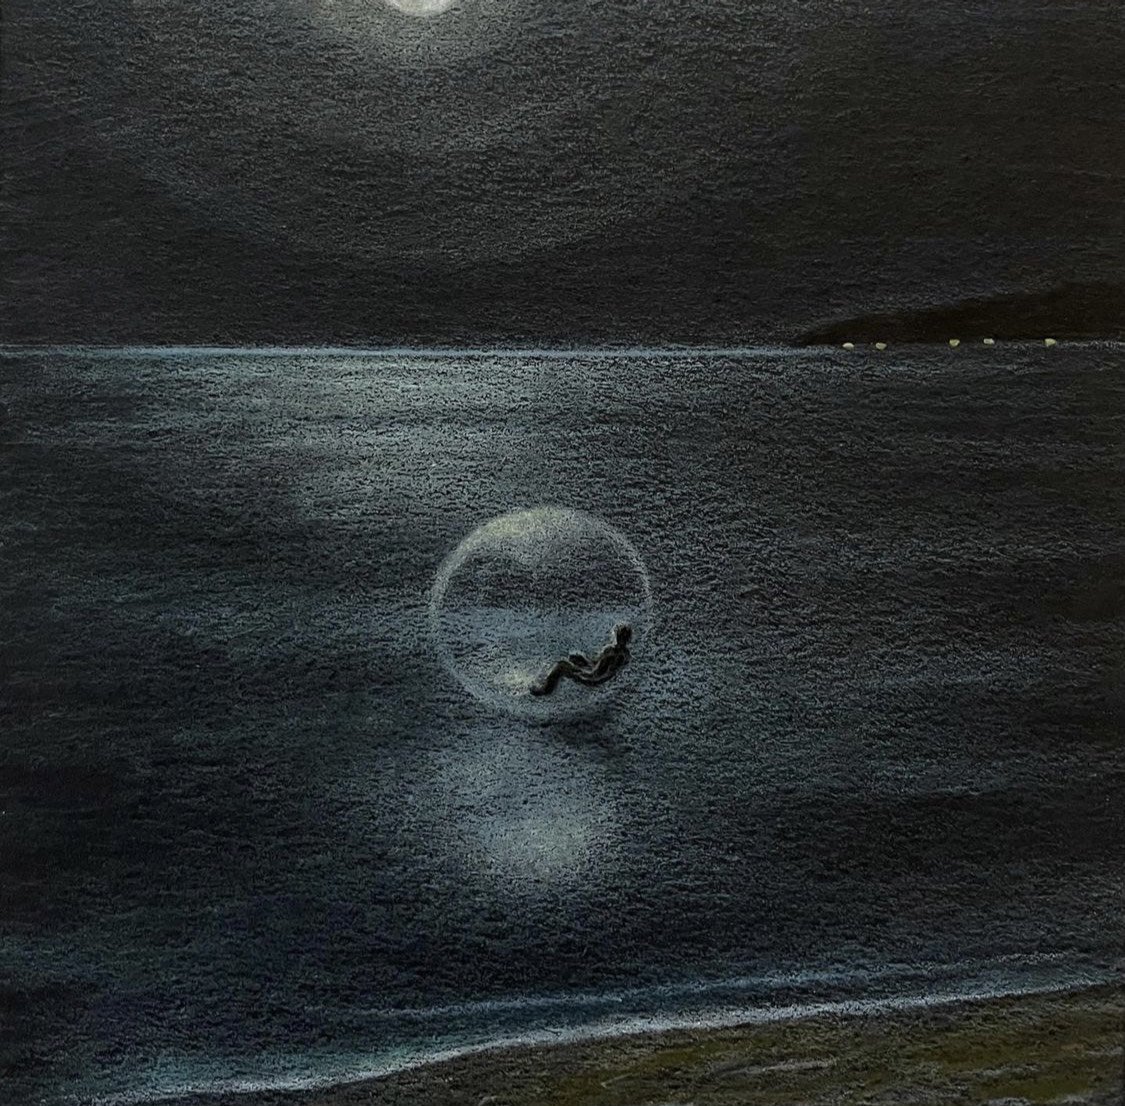 a painting of a person floating in a bubble on water above a large bright full moon. artist unknown.